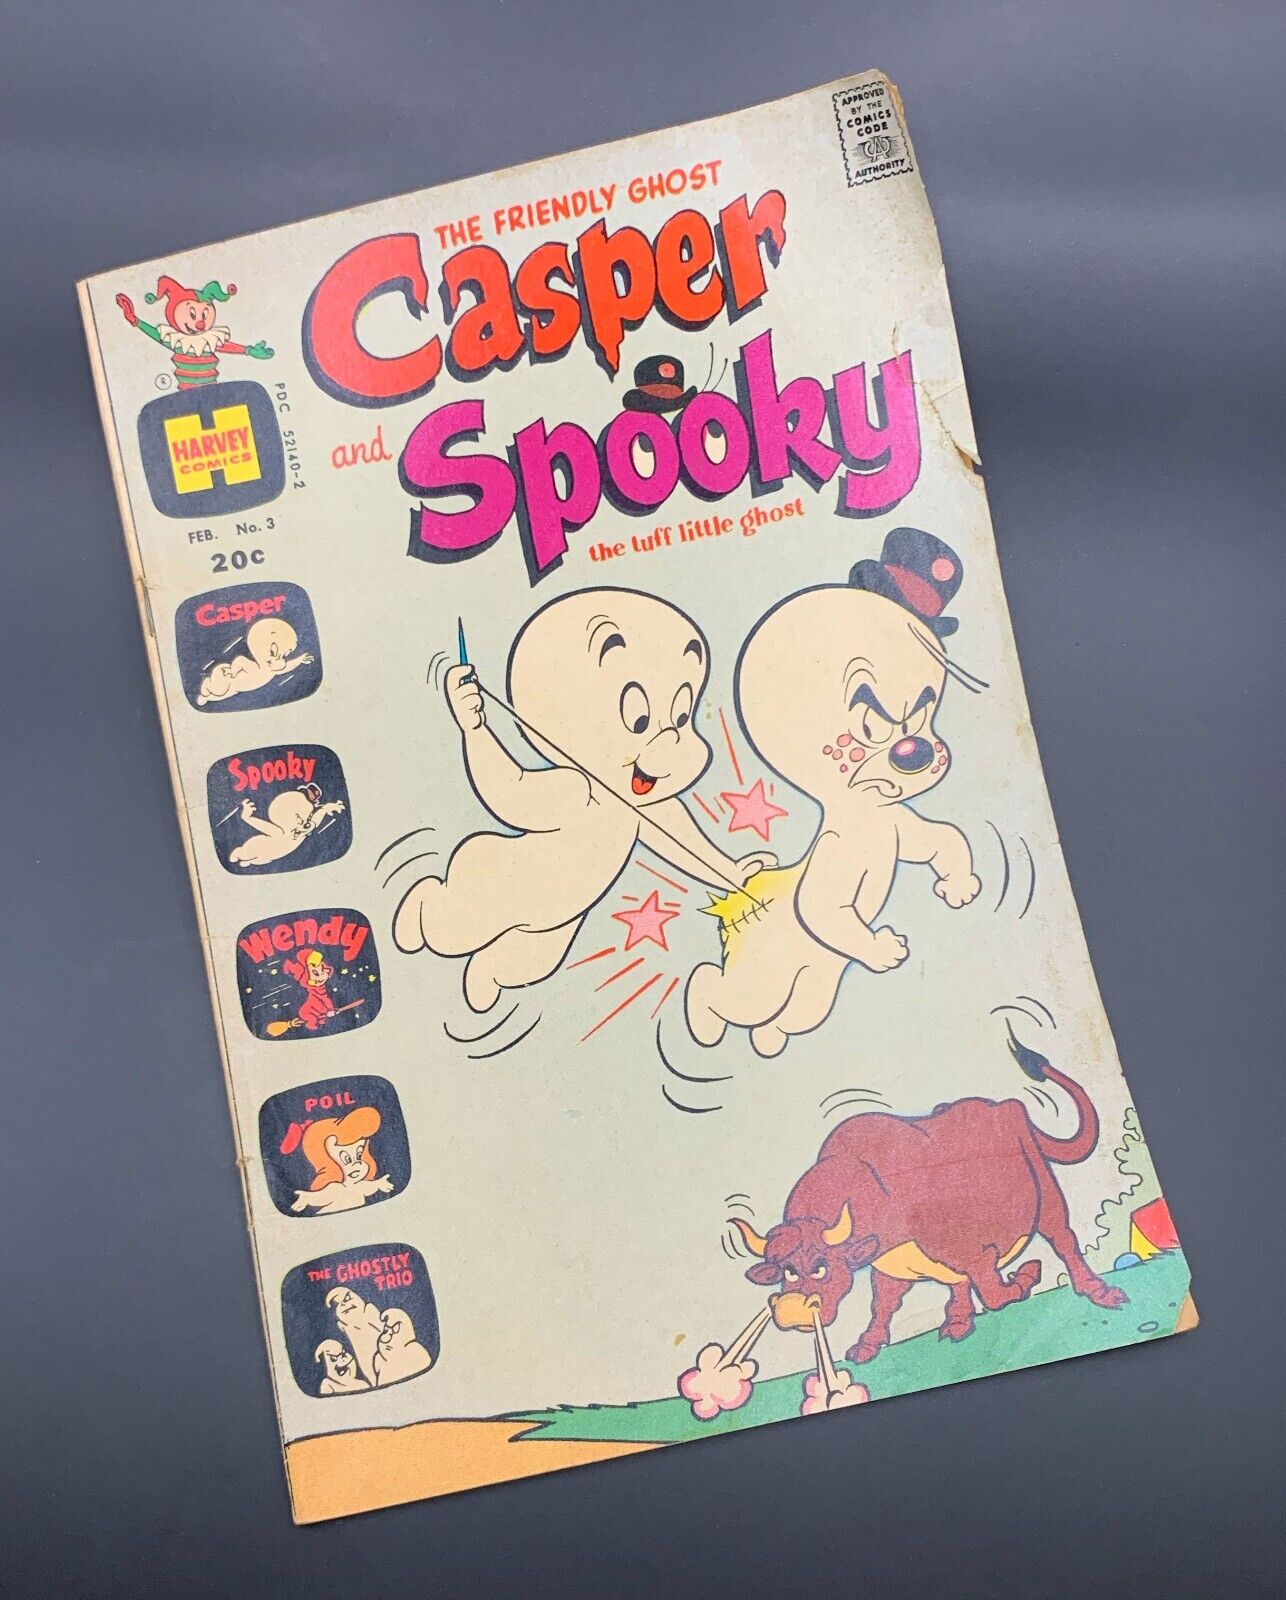 The Friendly Ghost Casper and Spooky - February 1973, No. 3 - Vintage Comic Book